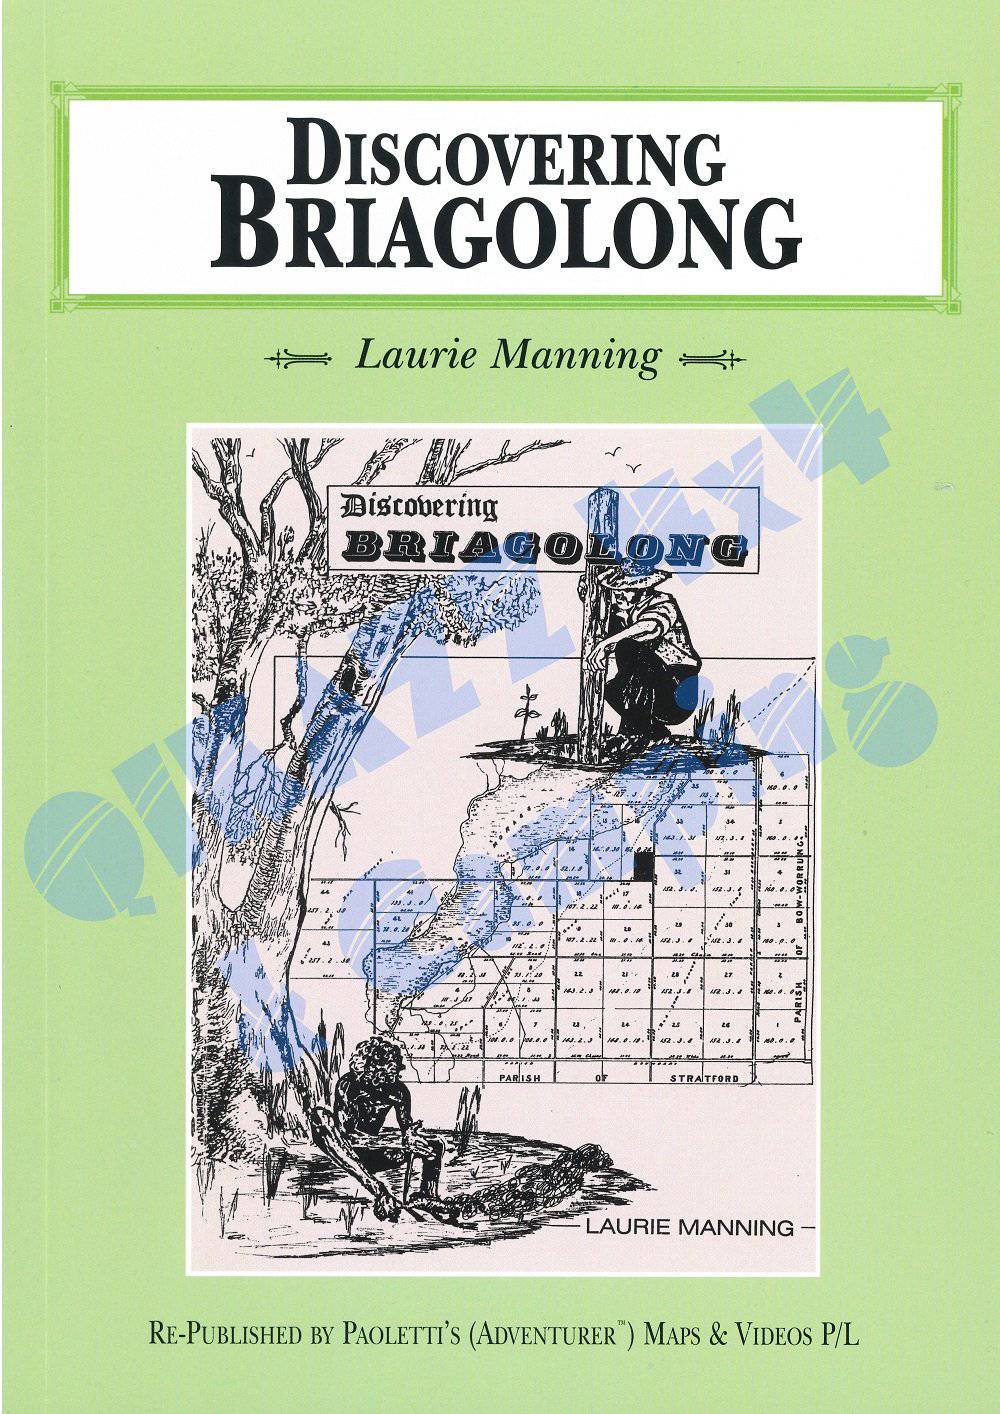 Discovering Briagolong by Laurie Manning, reprinted by Adventurer Maps | Adventurer Maps